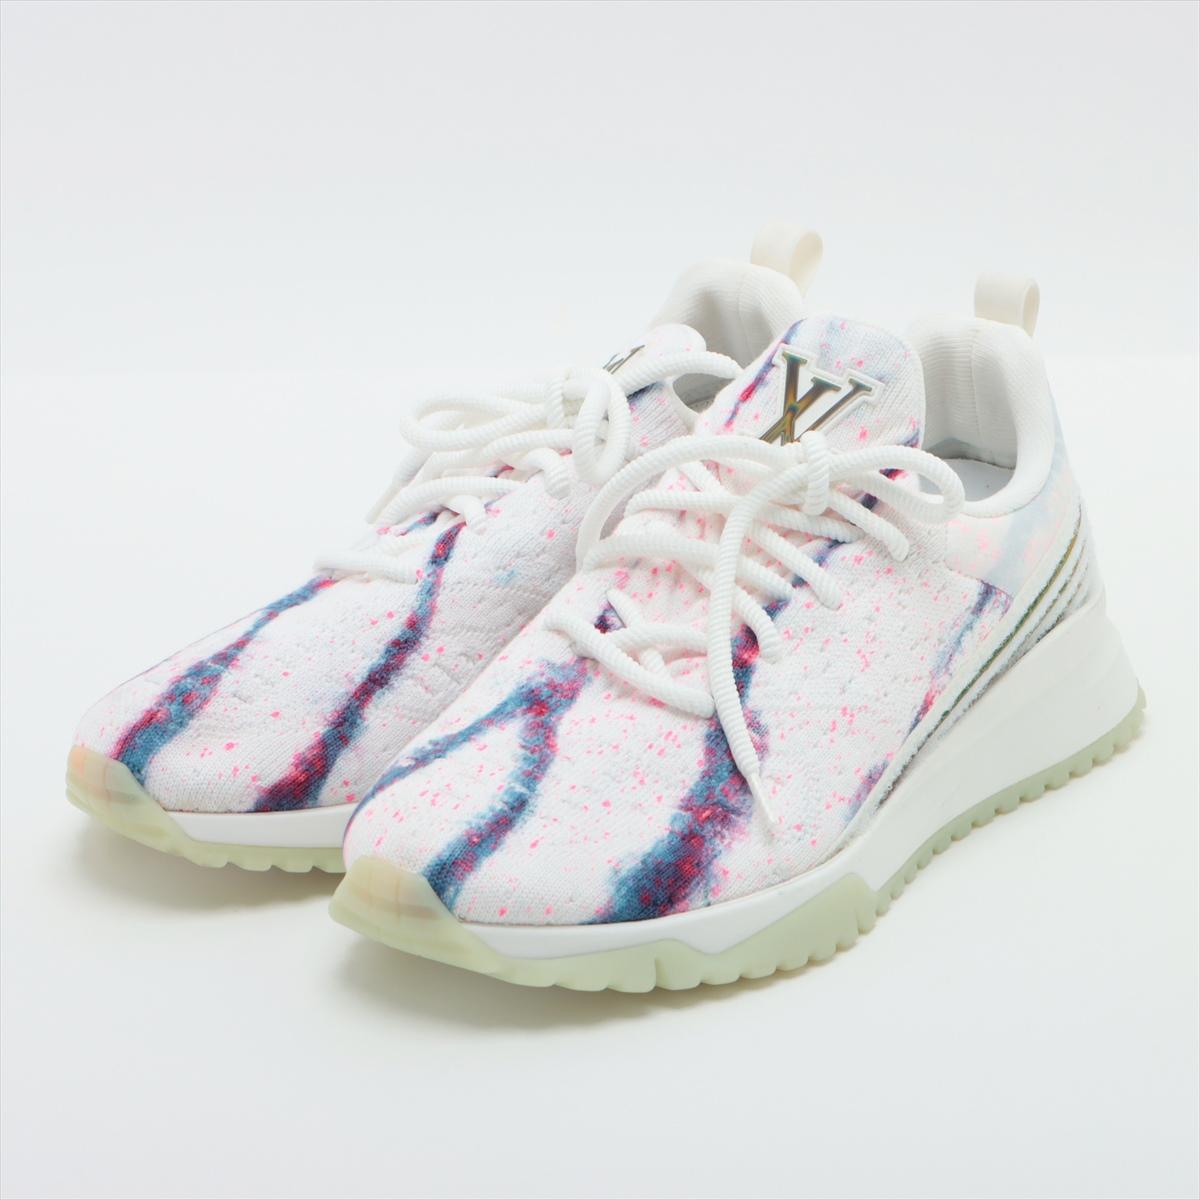 The Louis Vuitton V.N.R Sneakers in White and Pink offer a blend of sporty style and luxury craftsmanship. The sneakers feature a sleek white design accented with Blue and vibrant pink details, creating a striking contrast that catches the eye.